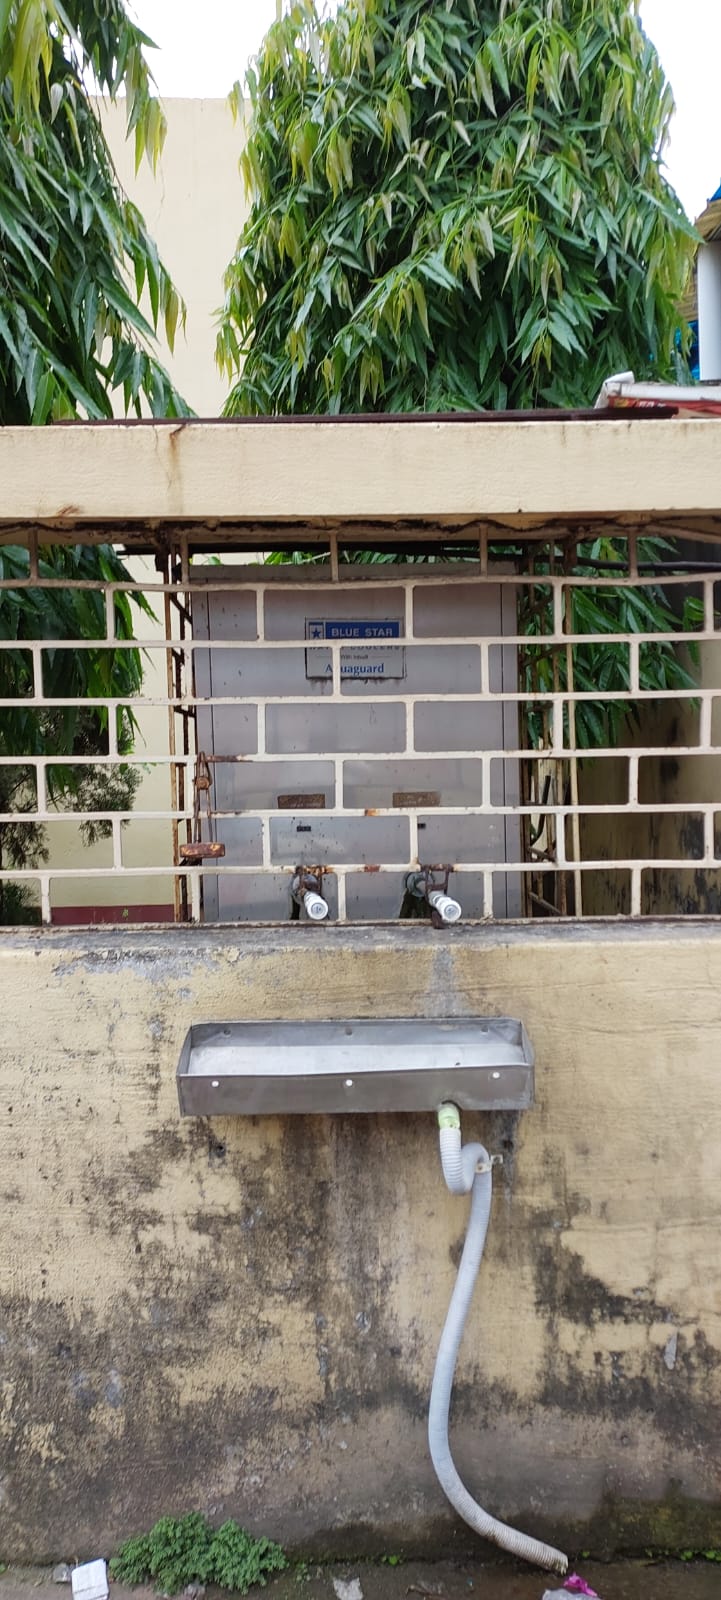 Our Permanent Project-Installation of Water Cooler outside our club premises for passersby.